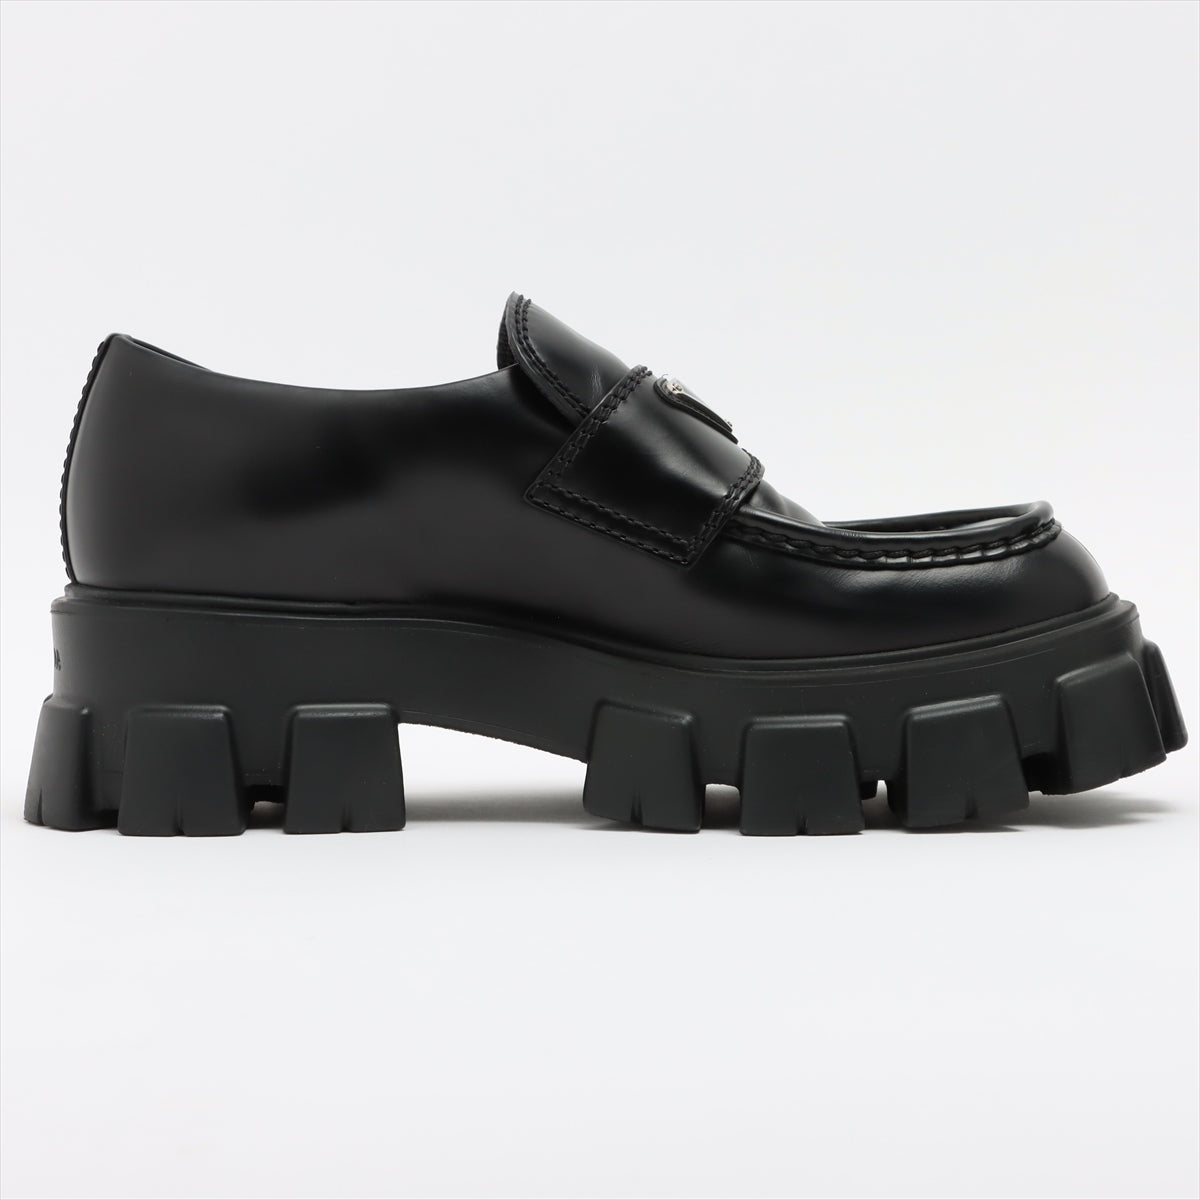 Prada Monolith Leather Loafer 6 Men's Black 2DE129 There is a bag